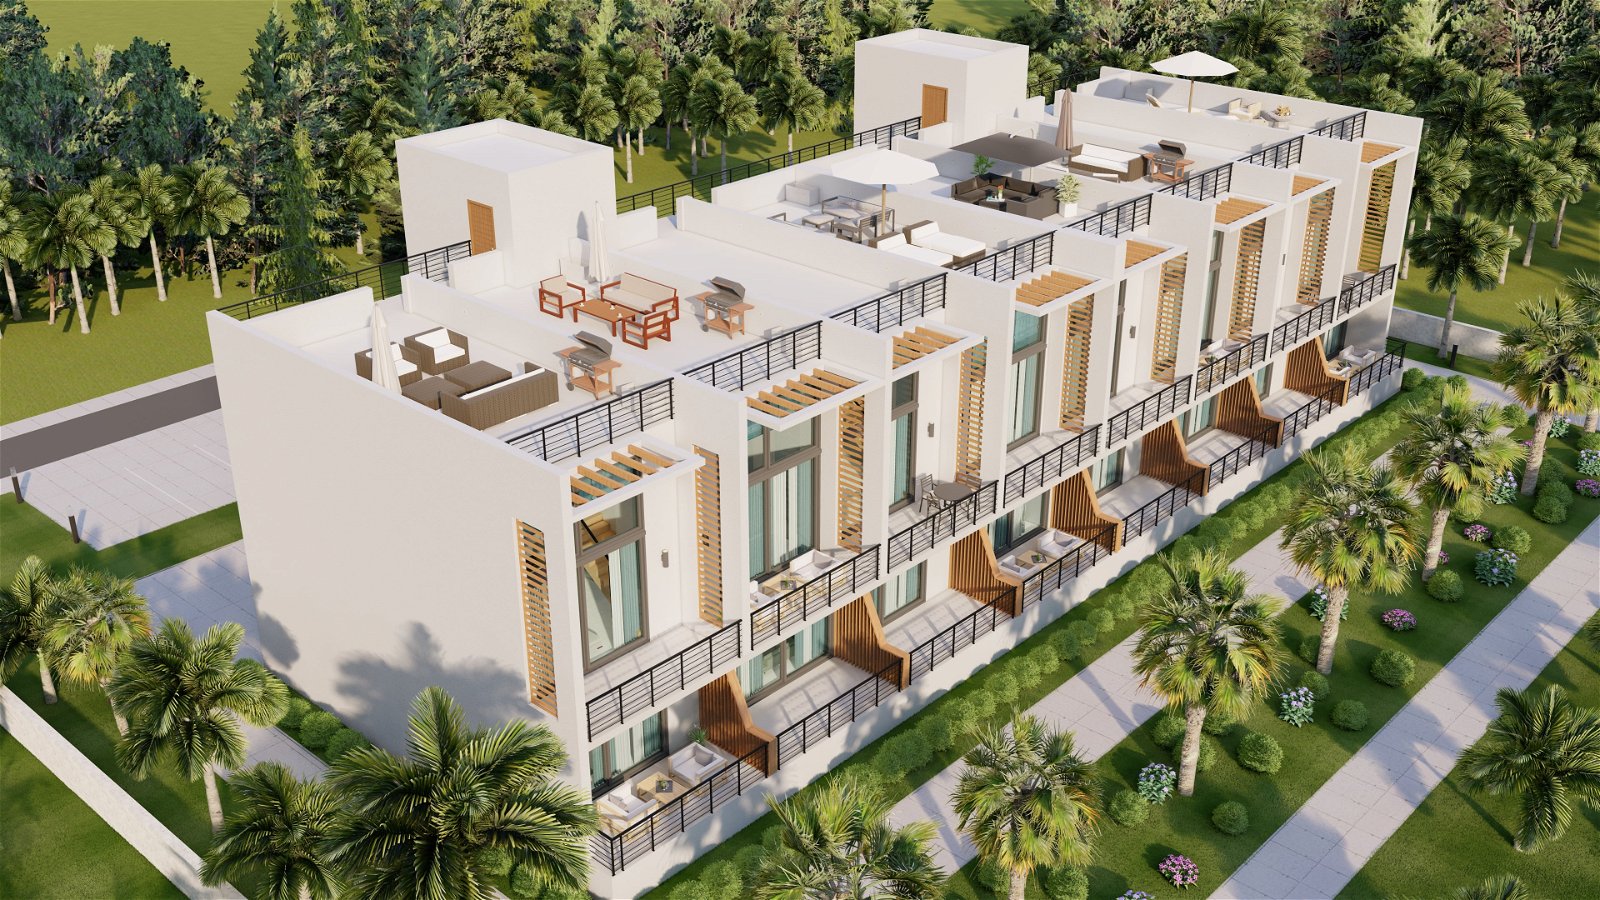 For Sale  Apartments    Studio,  1+1, 2+1, 3+1 in Esentepe Northern Cyprus-5d570ca6-6a37-4f21-8fc0-cd6f2cc504cf